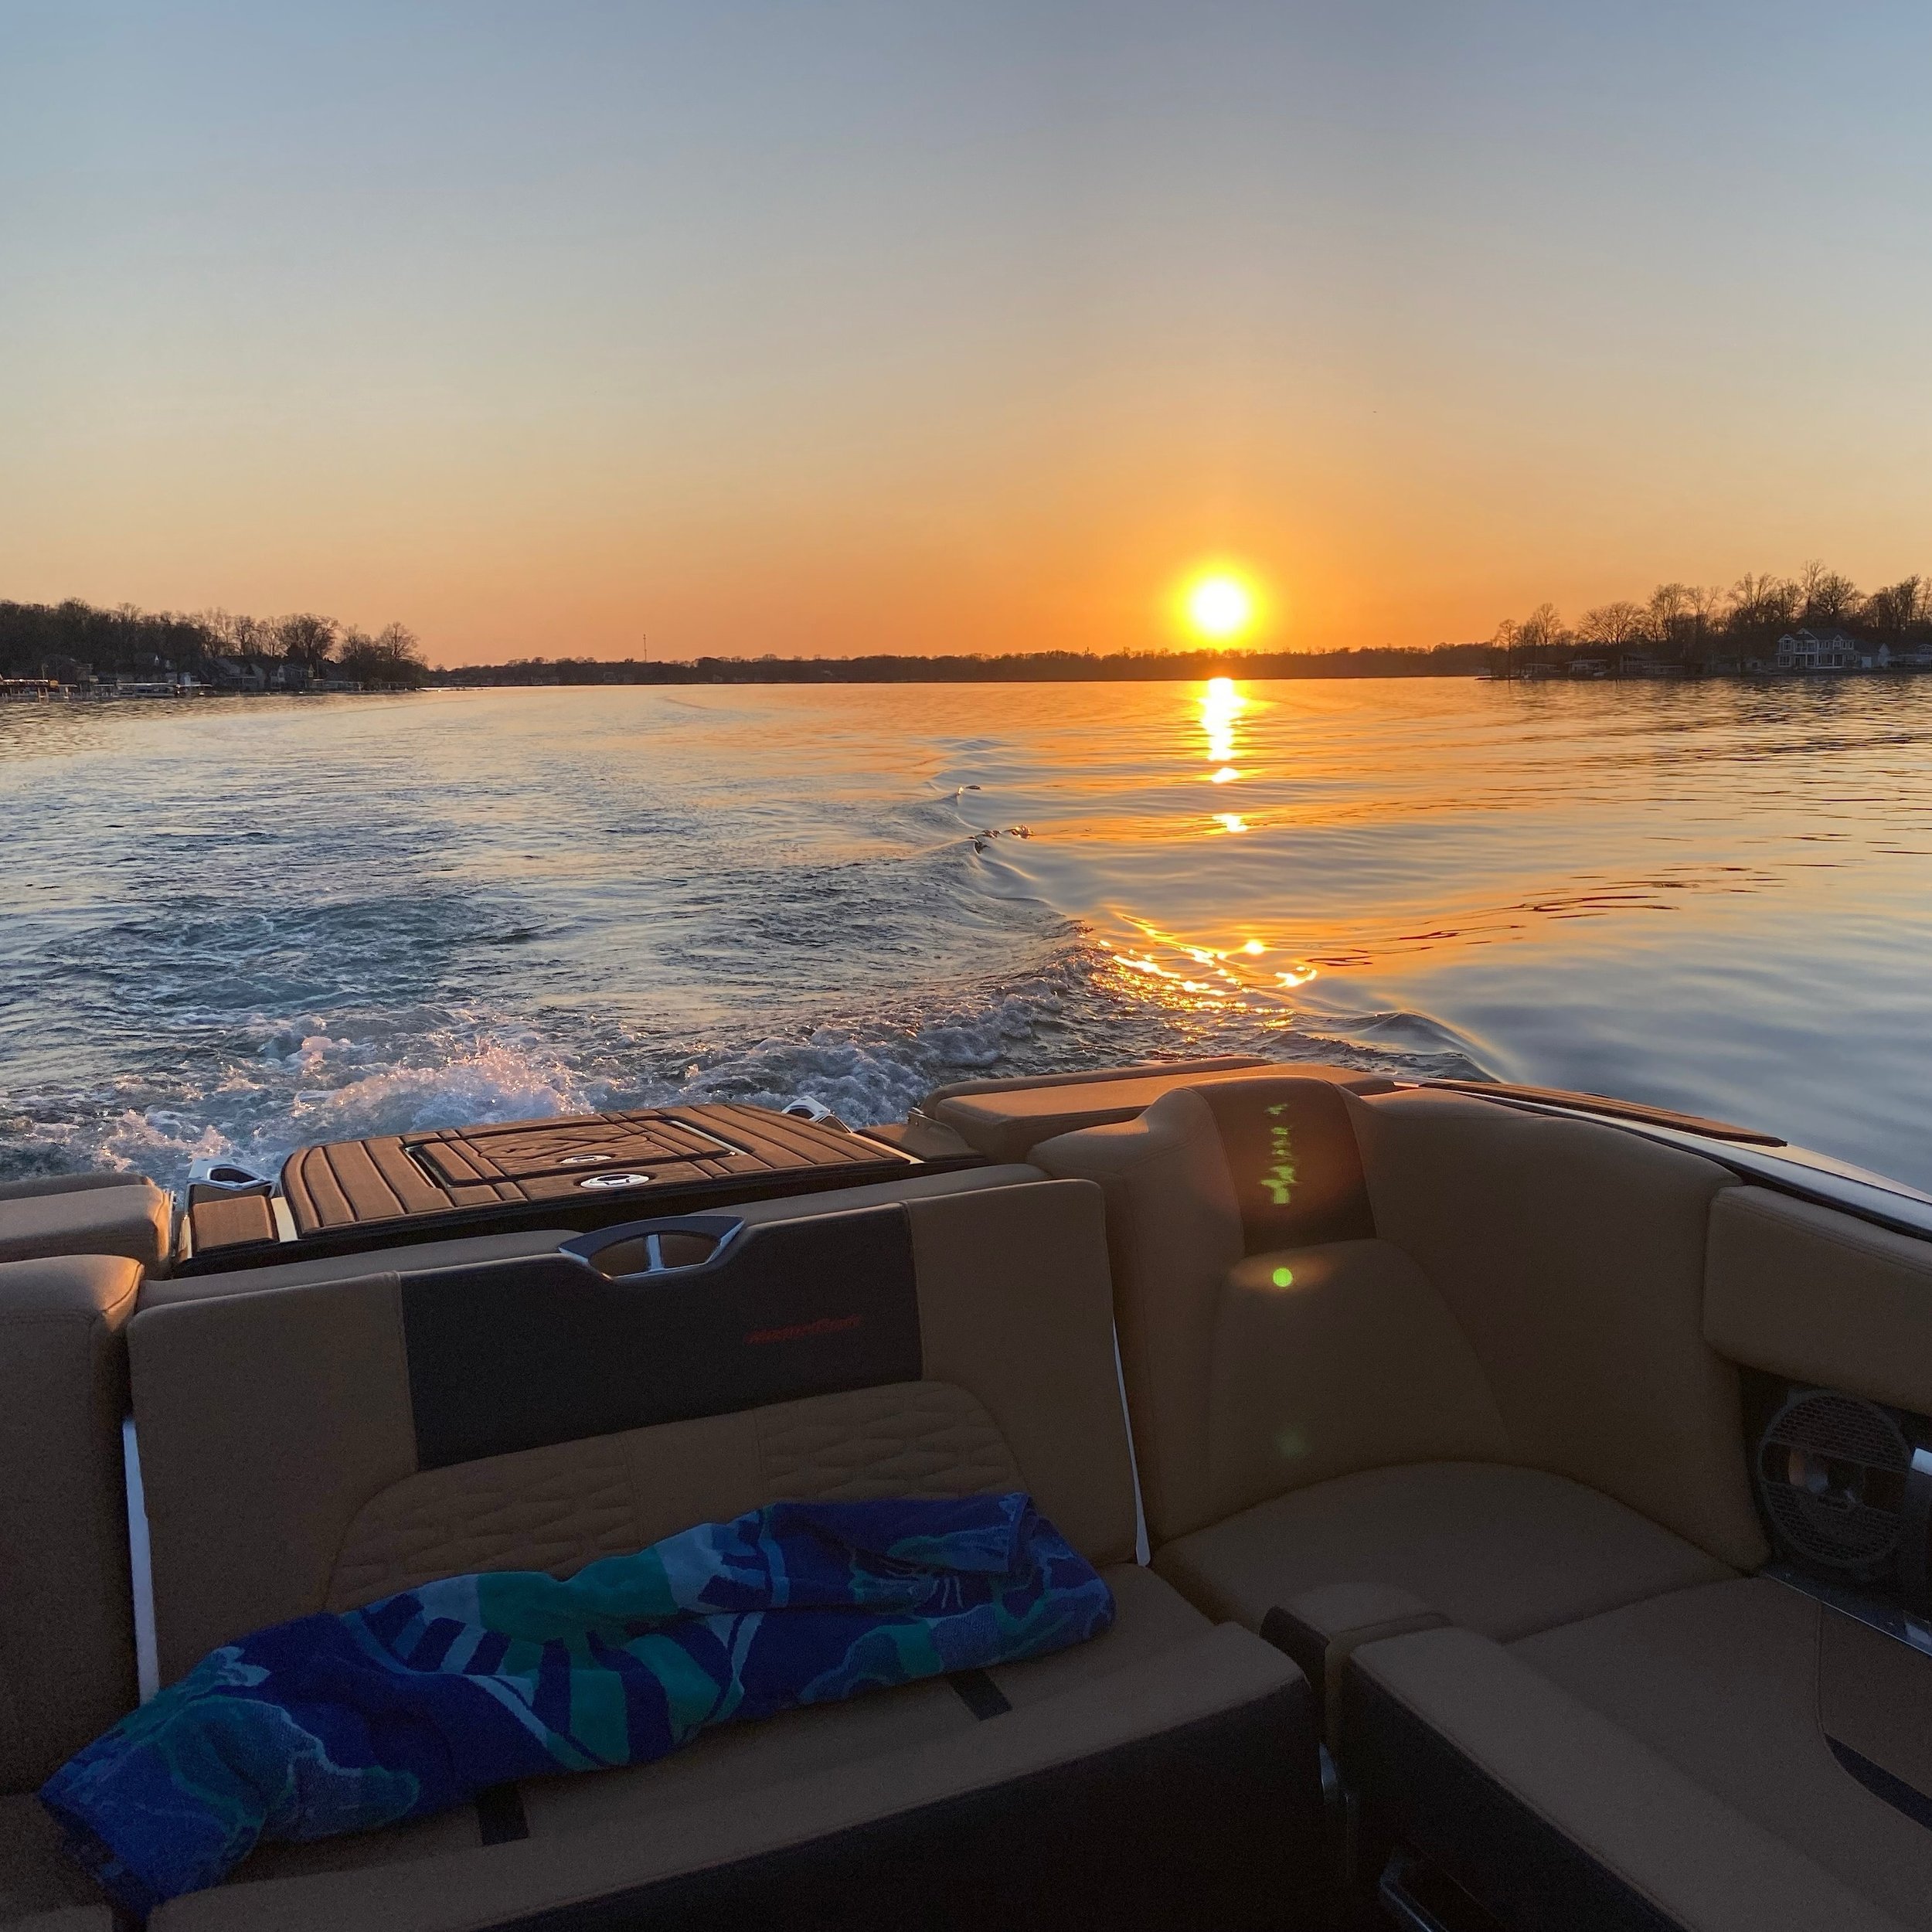 🎴🚤 Beautiful sunsets on Diamond Lake!

📸 Share your weekend pics with us and we may share them on our Social Media.
📸 Tag us at @diamondlakeassociation 
.
#DiamondLake #DiamondLakeAssociation #DLA #DiamondLakeSandbar #Michigan #Cassopolis #LakePi